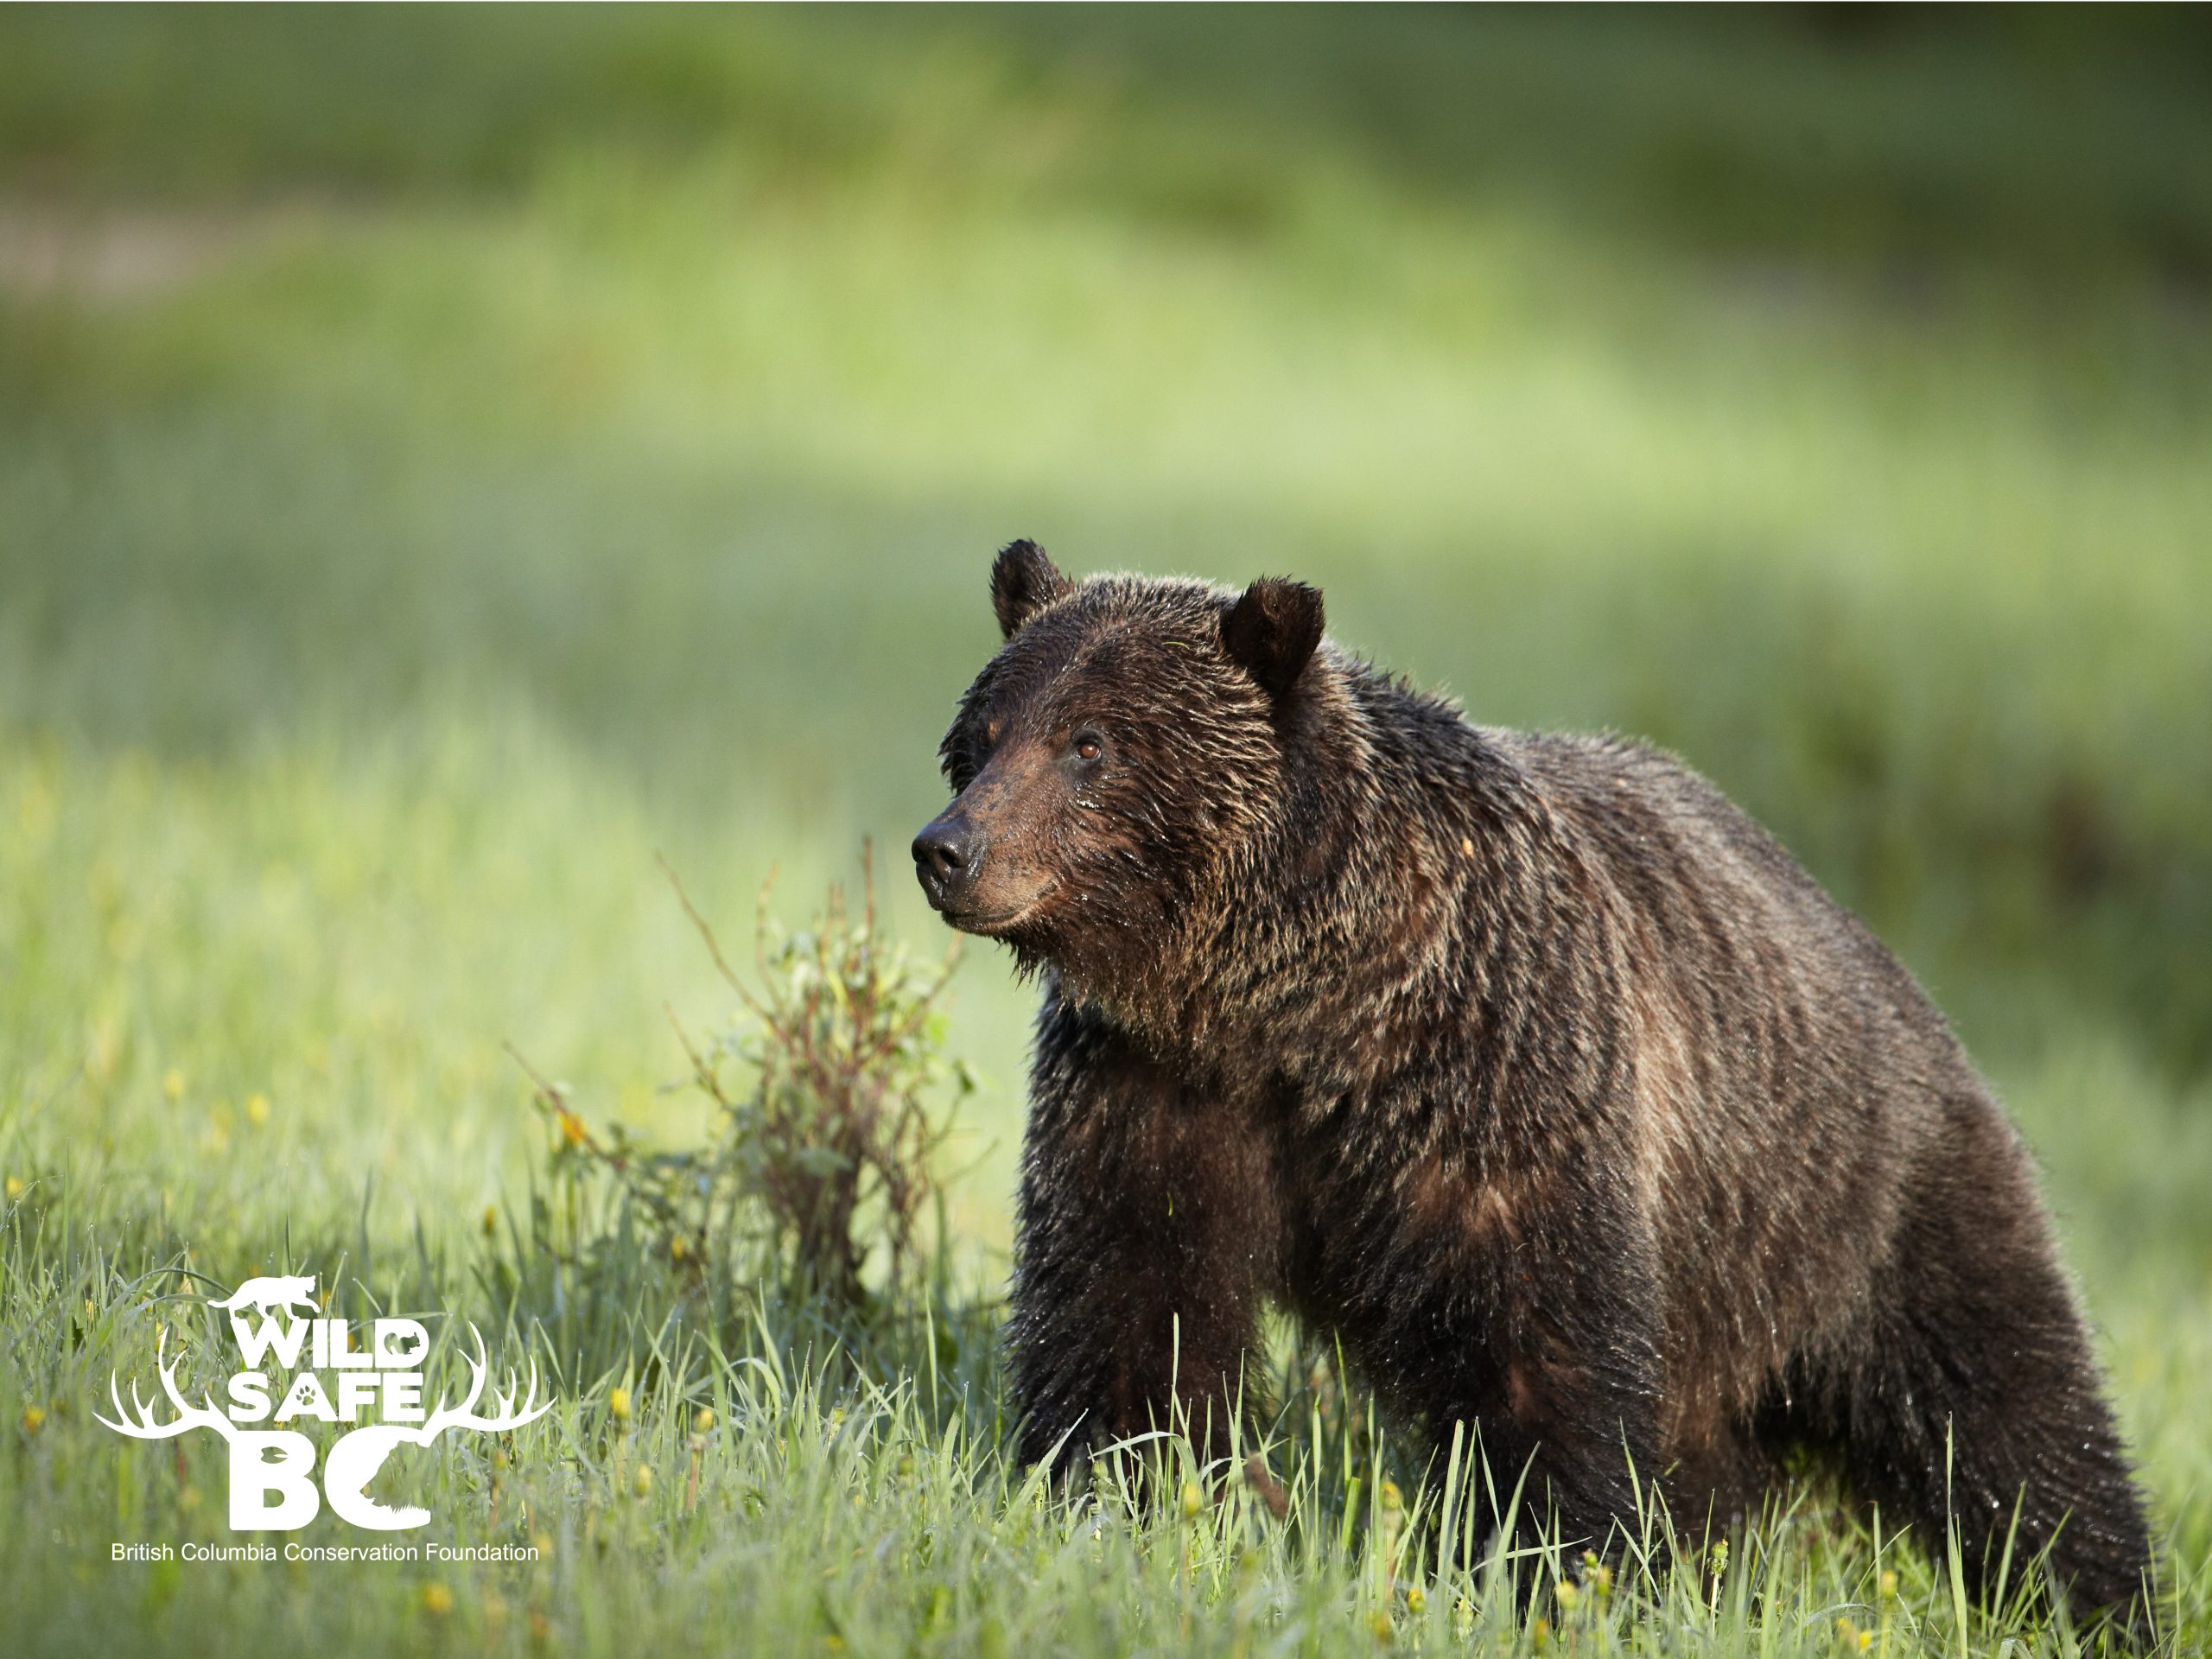 About the Grizzly Bear - Grizzly bear conservation and protection